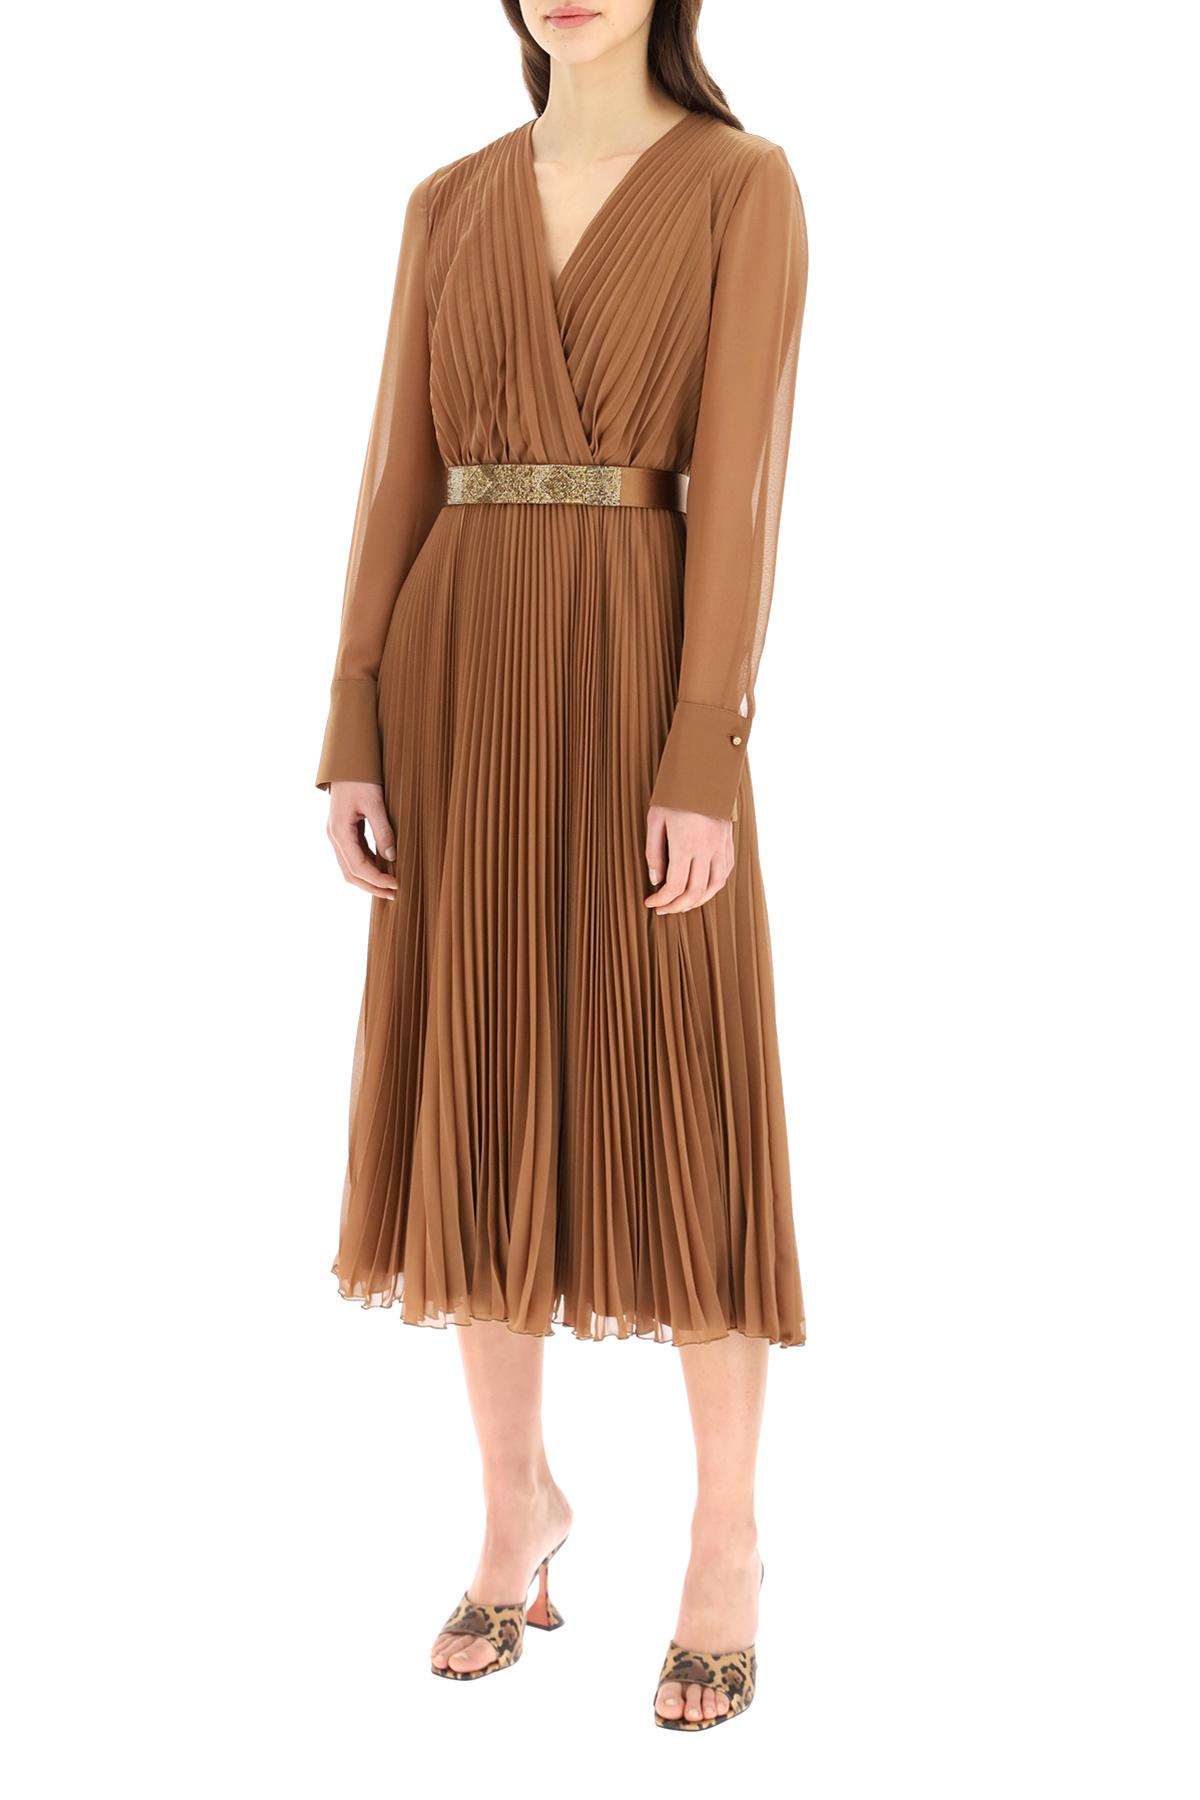 Max Mara Satin Pleated Dress With Belt in Brown - Lyst